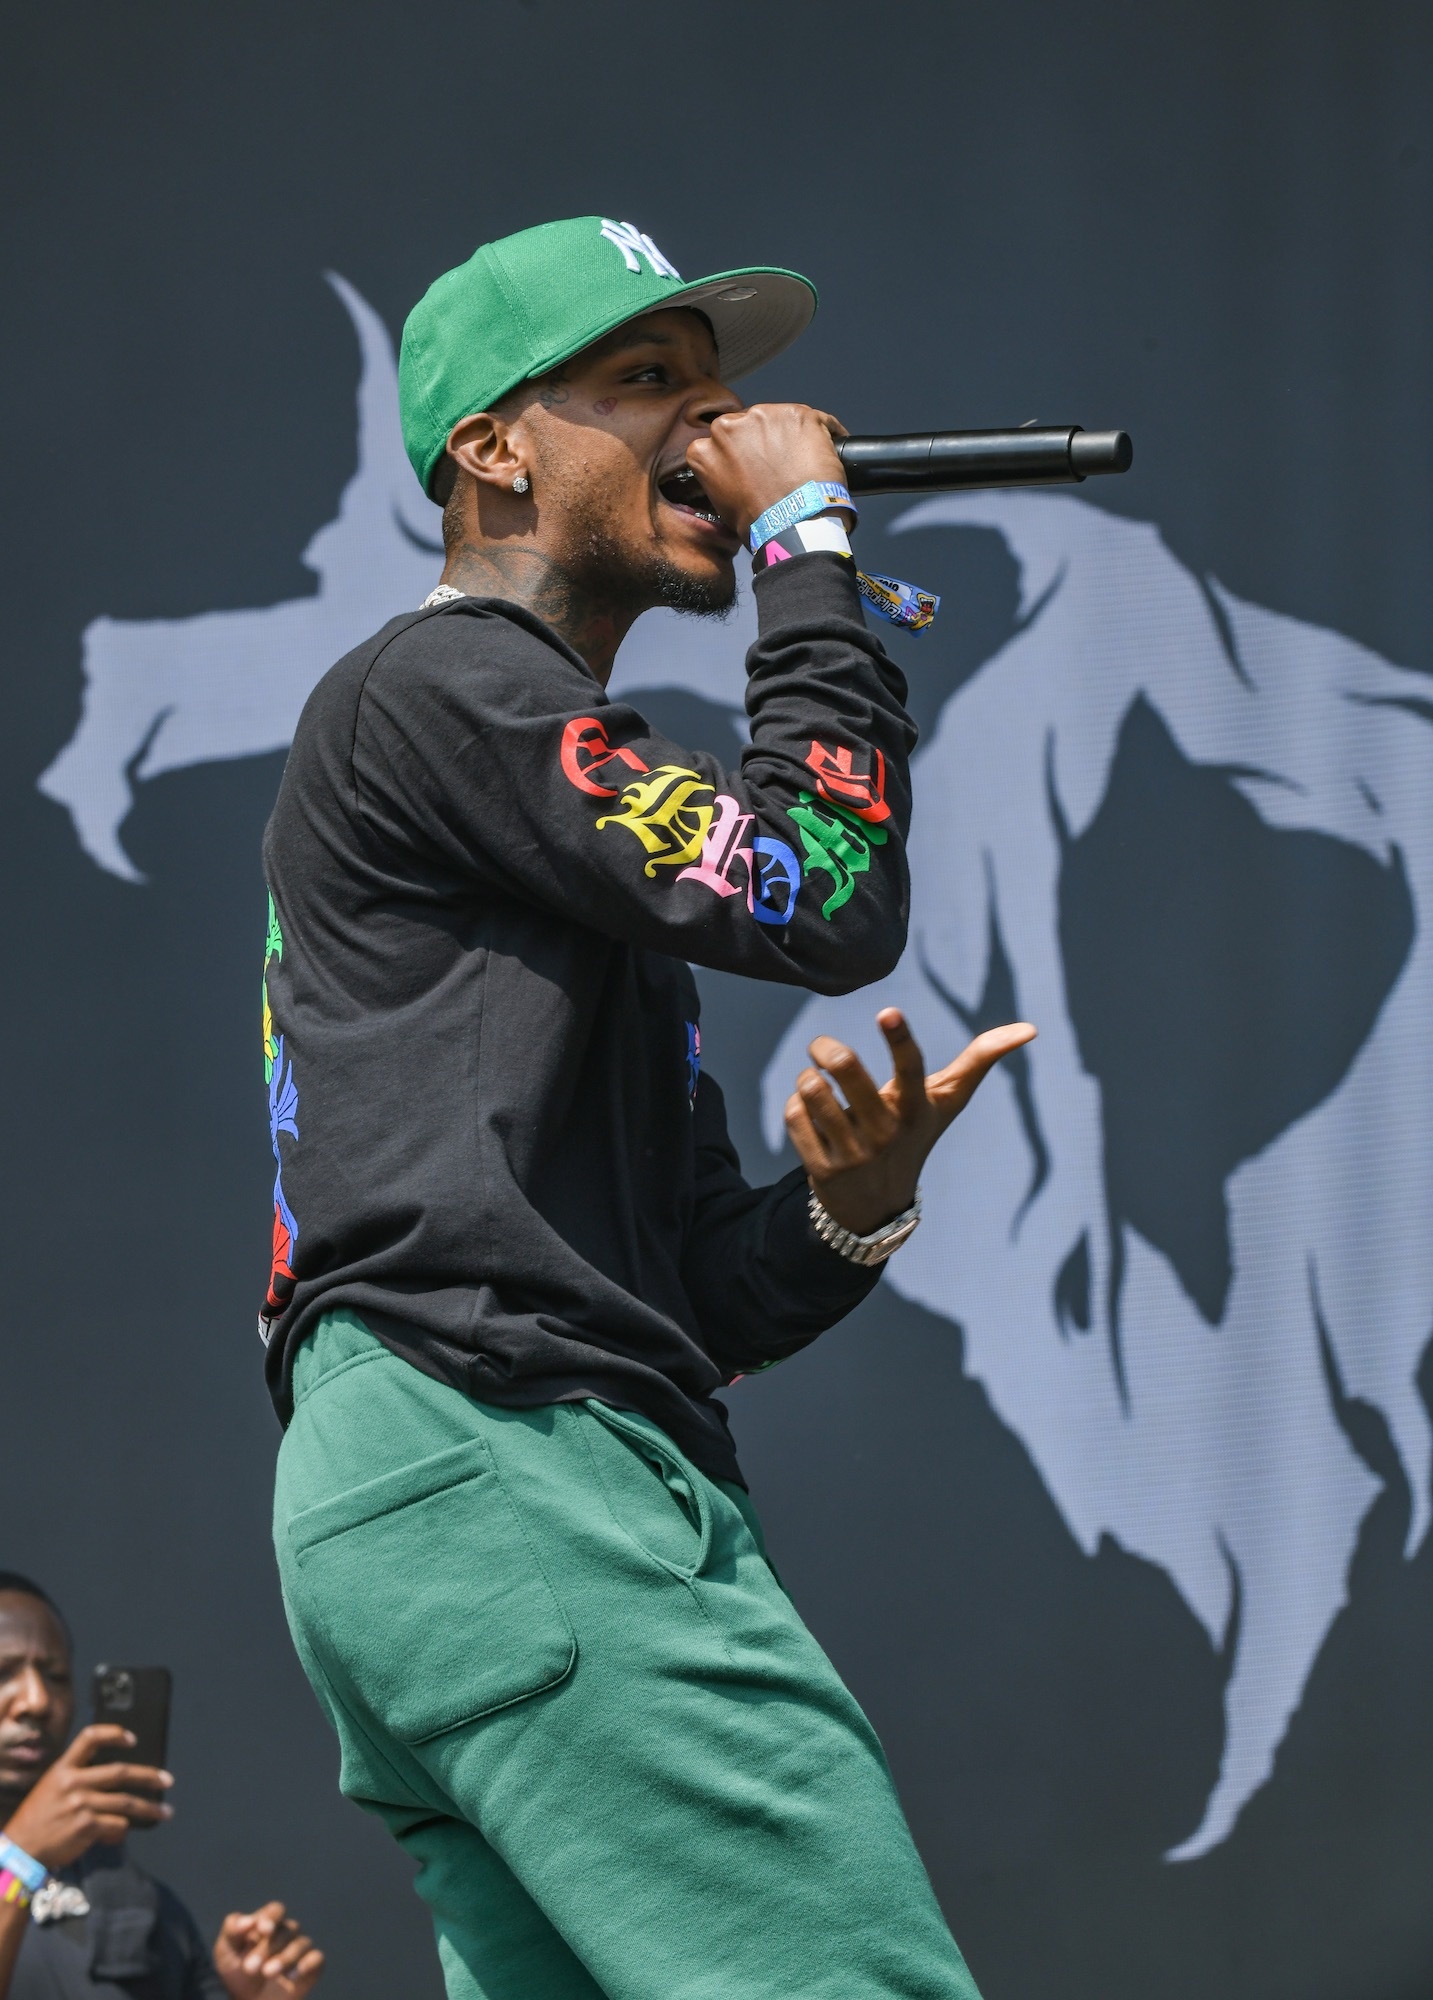 Toosii Live at Lollapalooza GALLERY - Chicago Music Guide 1440x2000